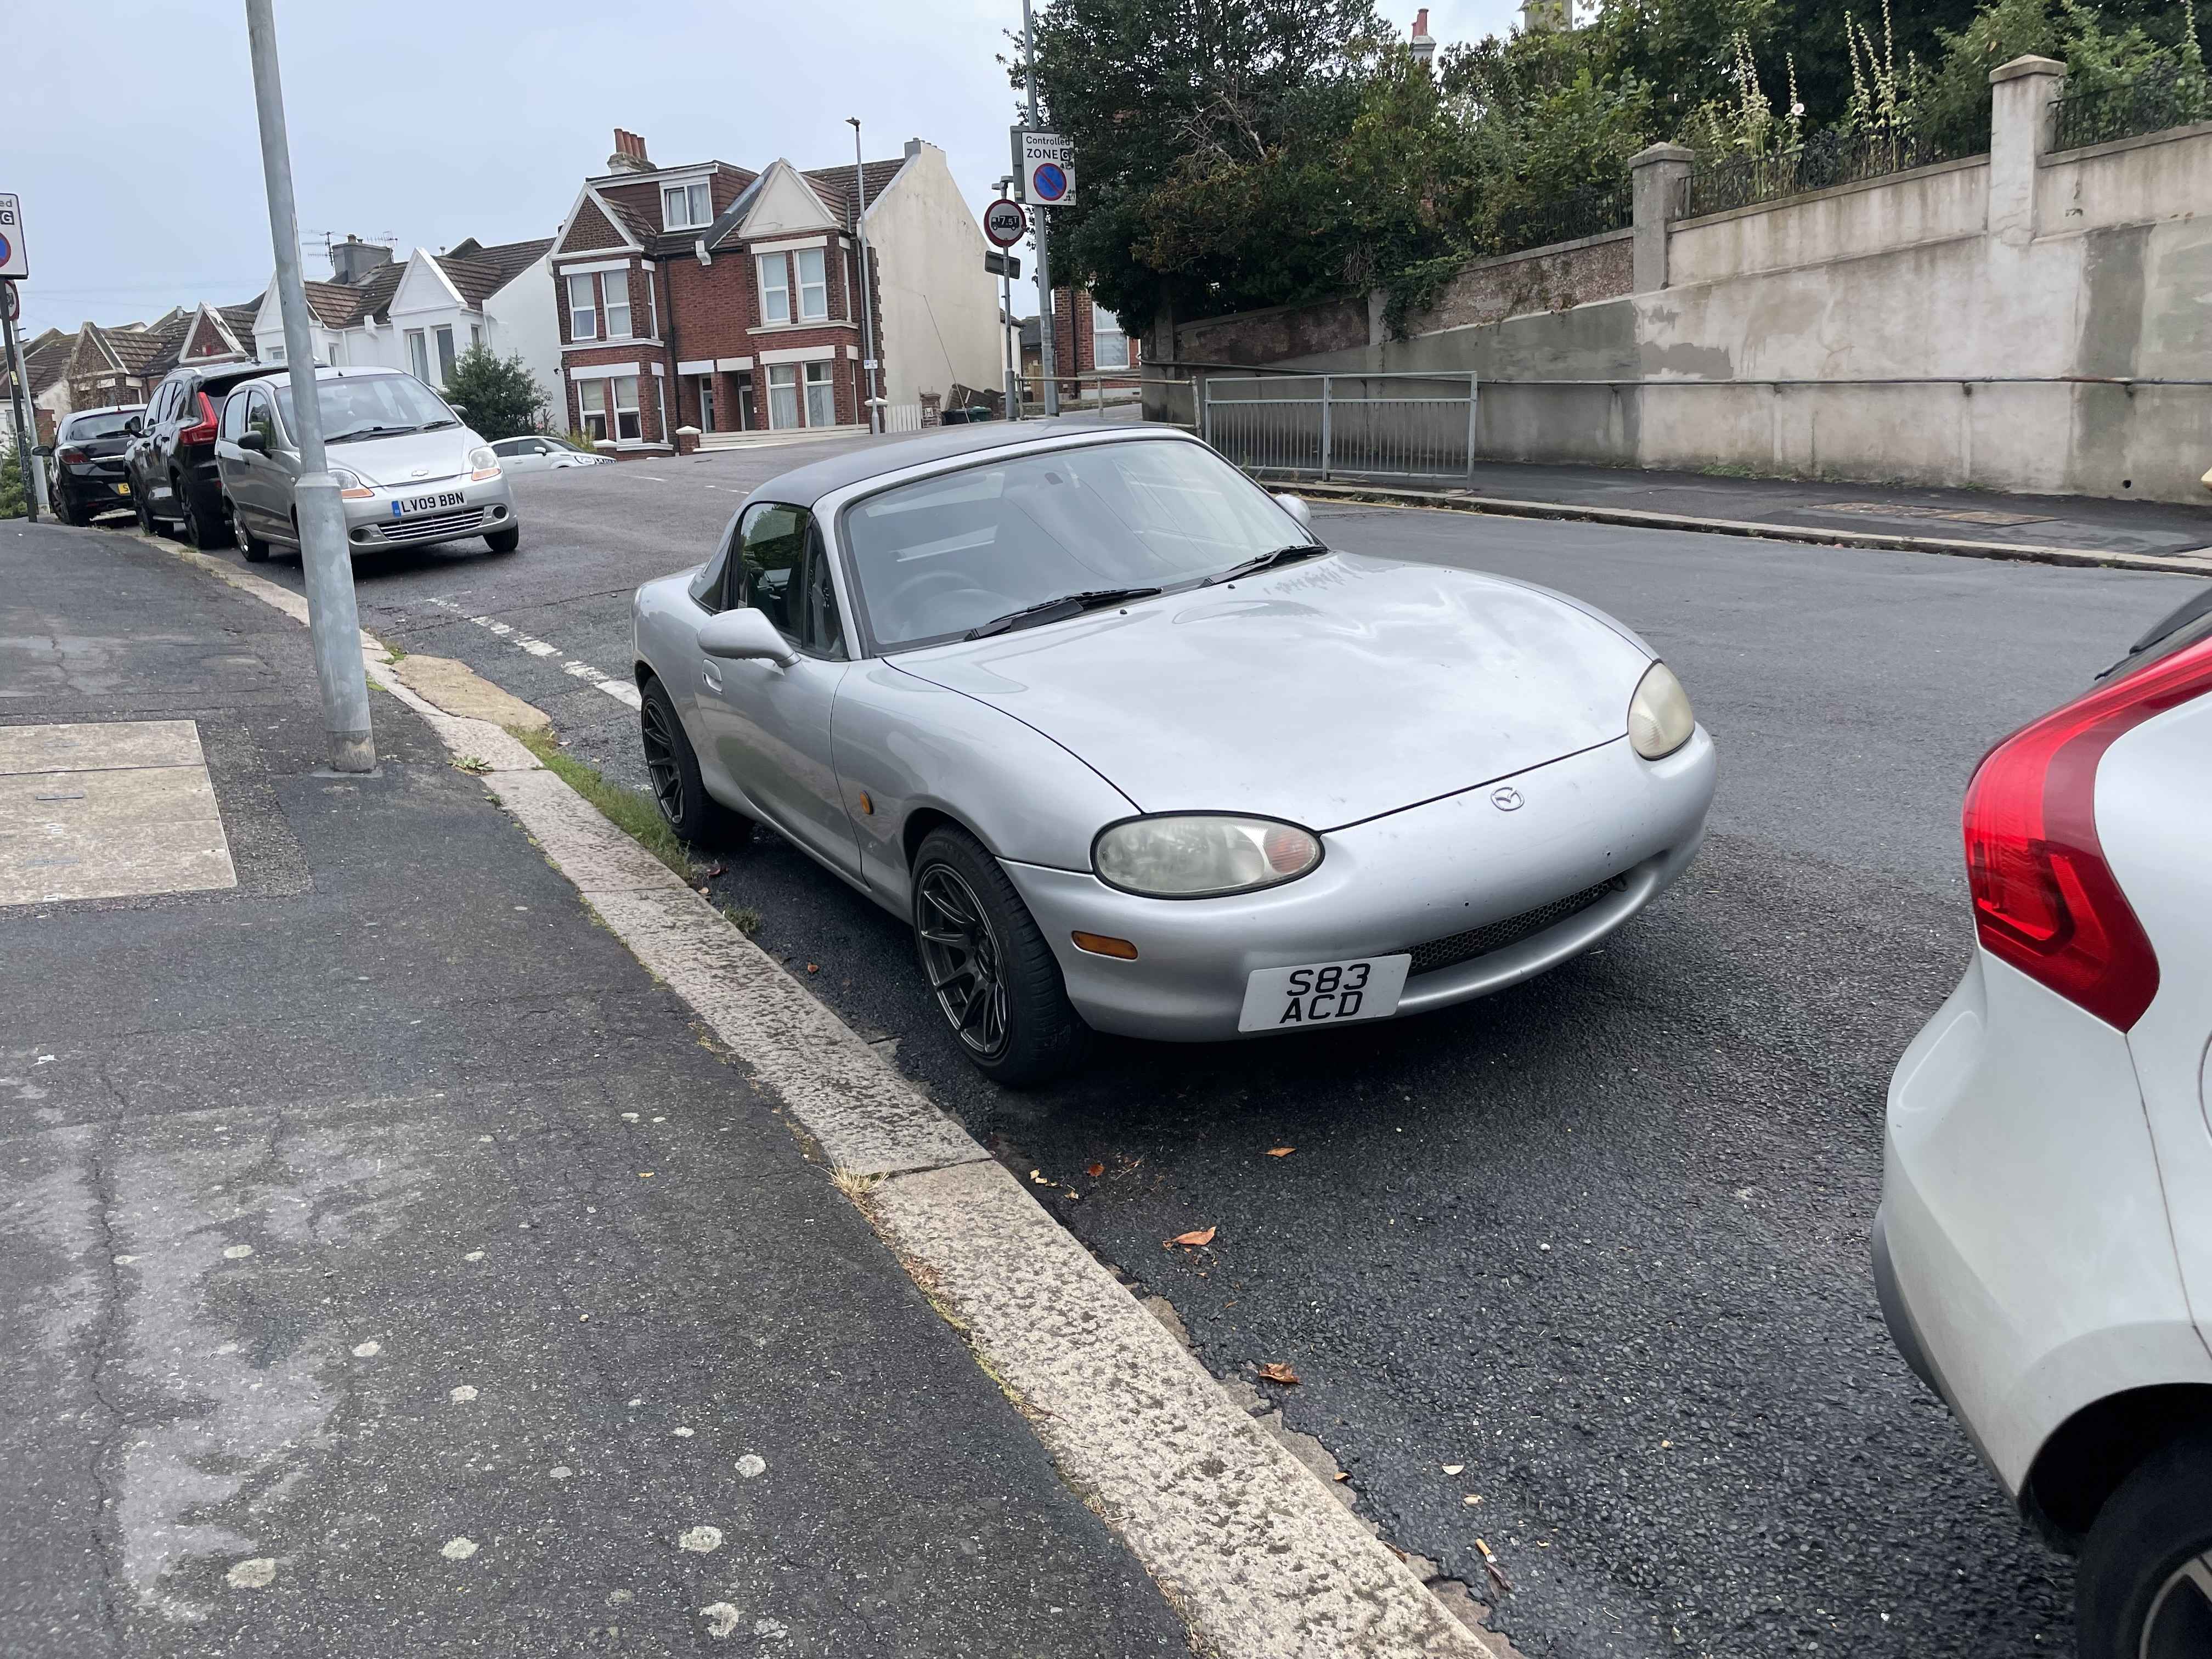 Photograph of S83 ACD - a Silver Mazda MX-5 parked in Hollingdean by a non-resident. The first of two photographs supplied by the residents of Hollingdean.